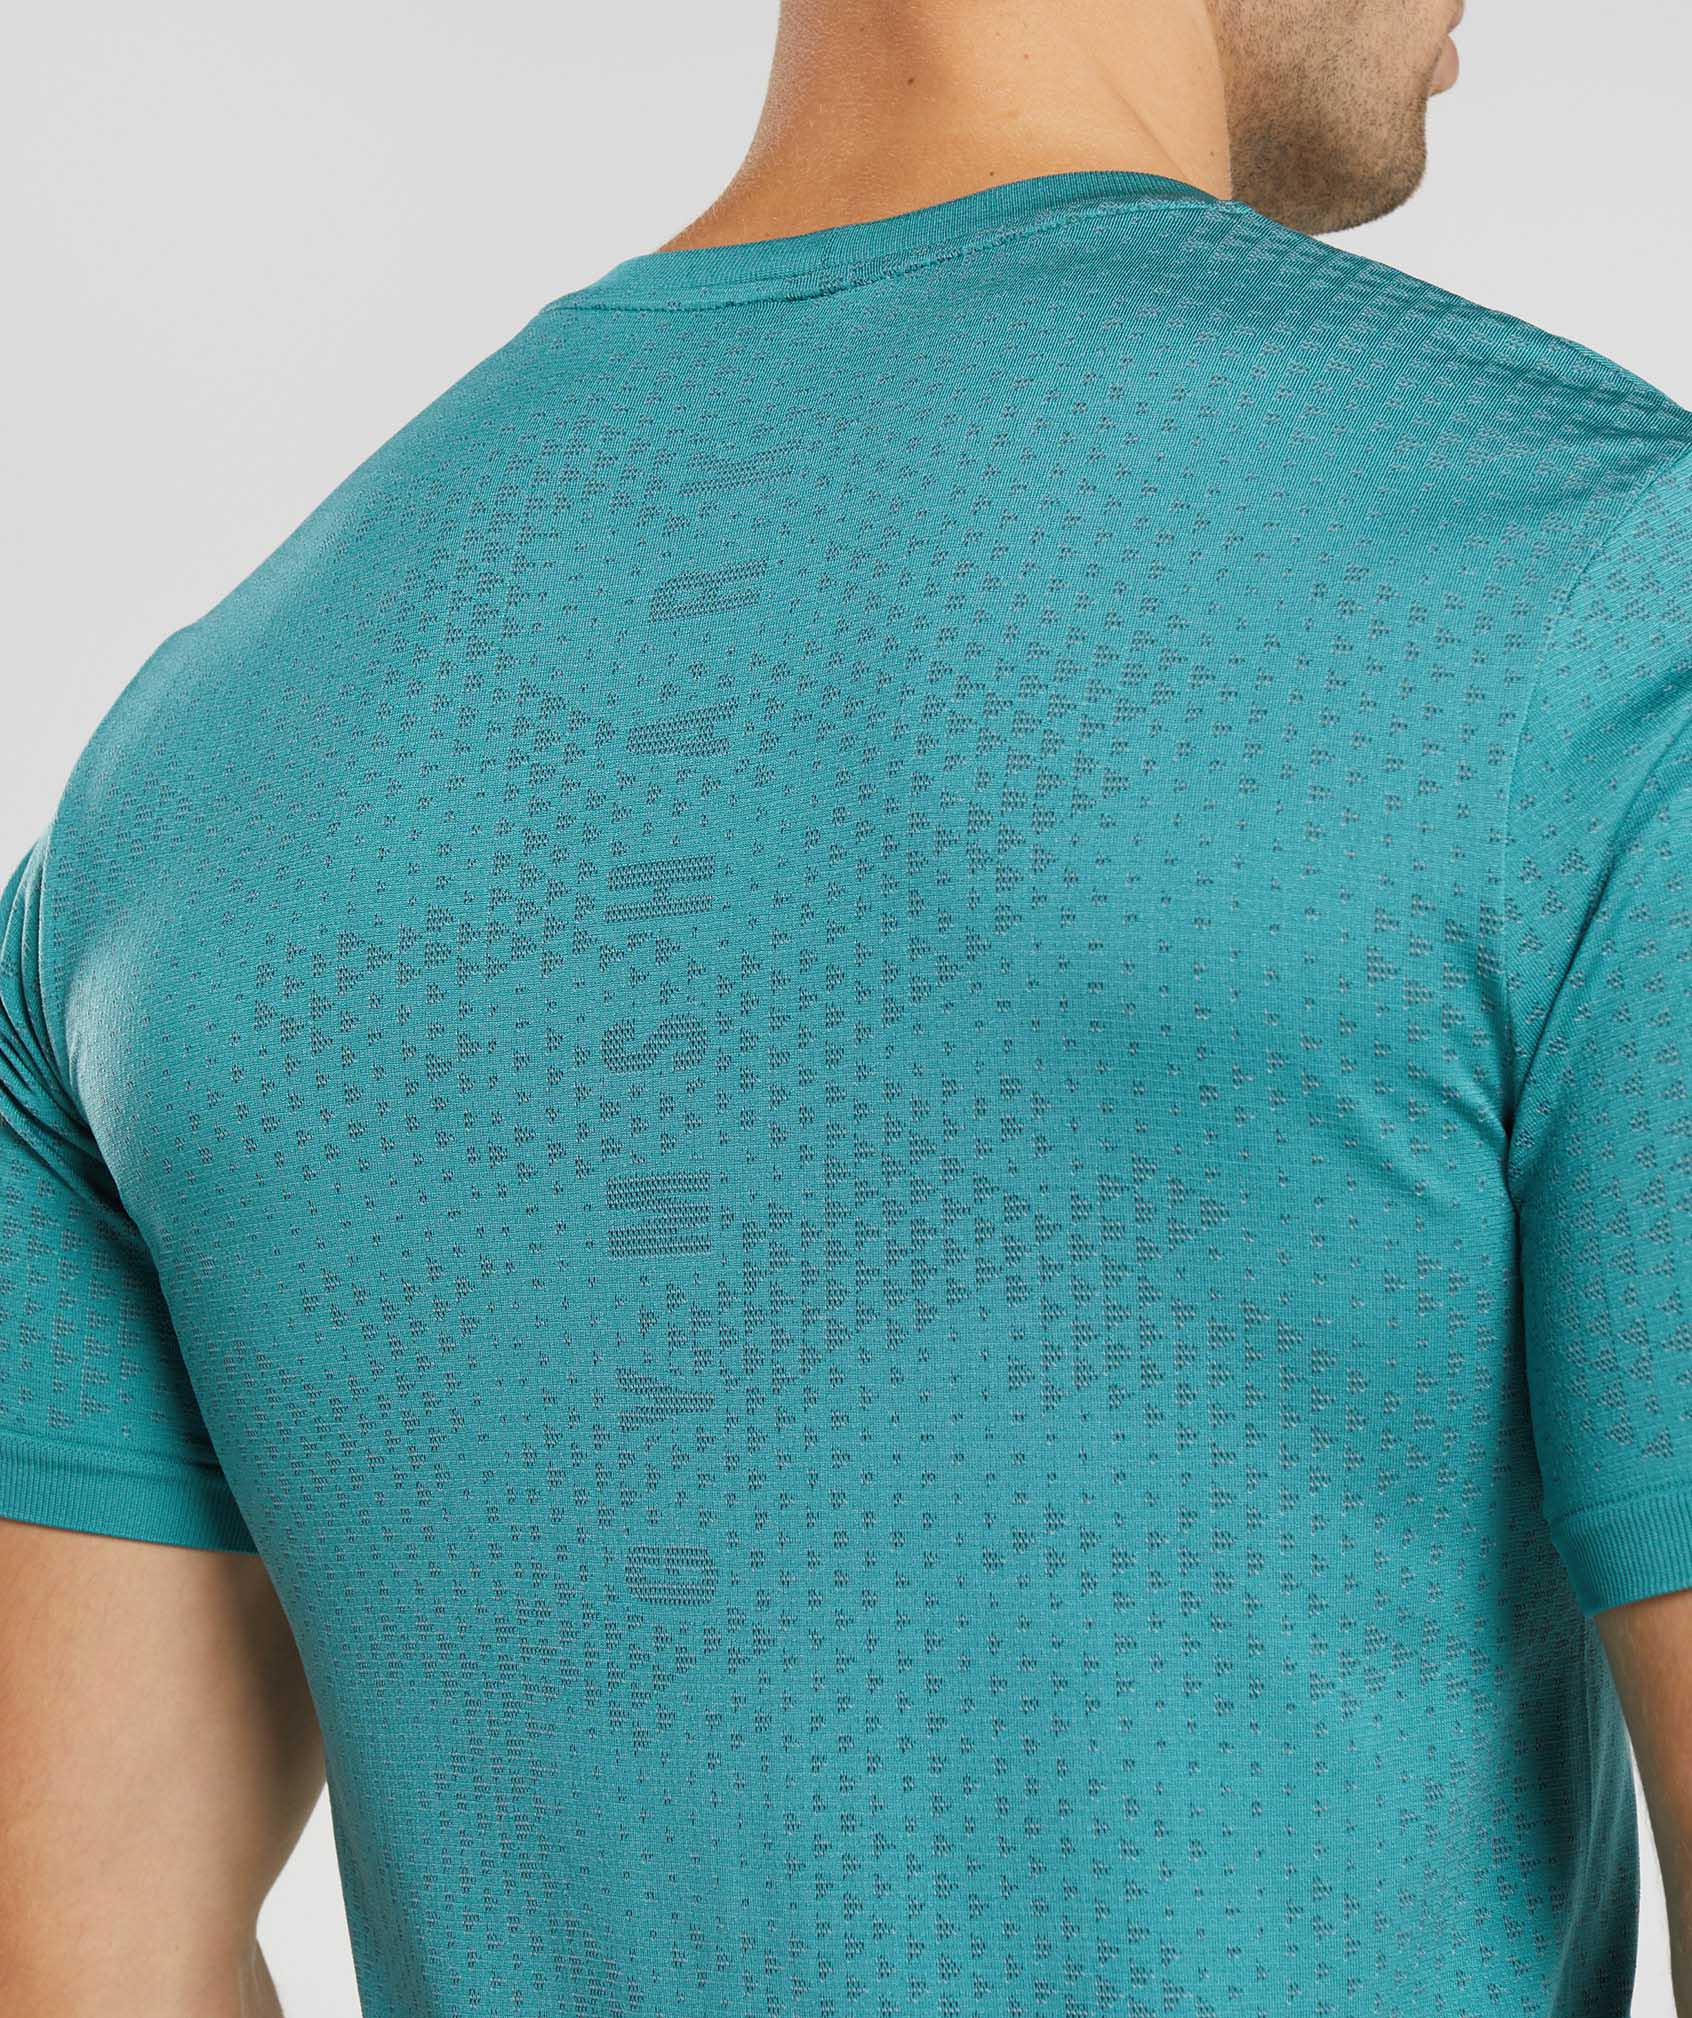 Sport Seamless T-Shirt in Slate Blue/Winter Teal - view 4